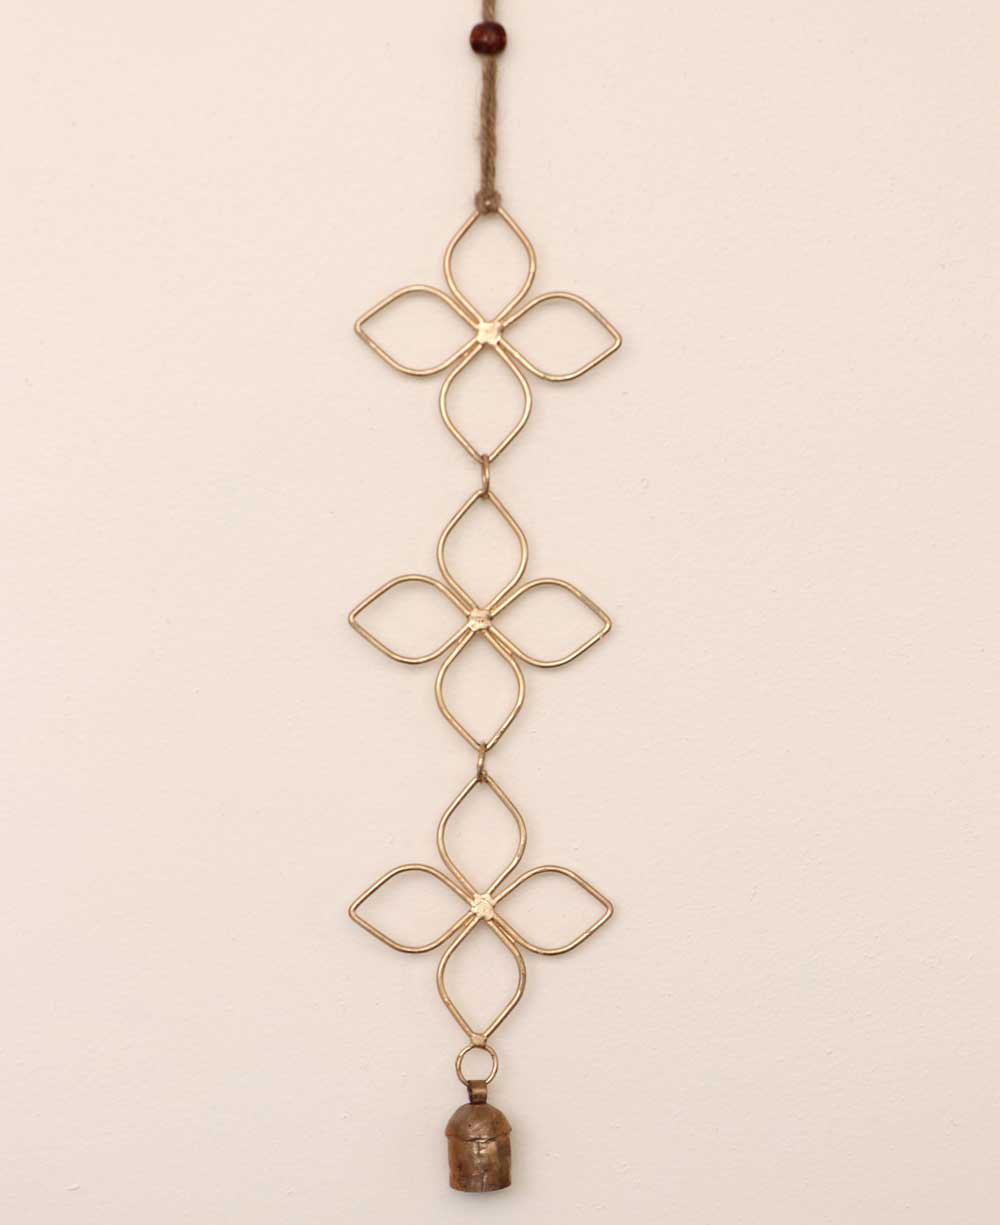 Bell Chime Wall Hanging